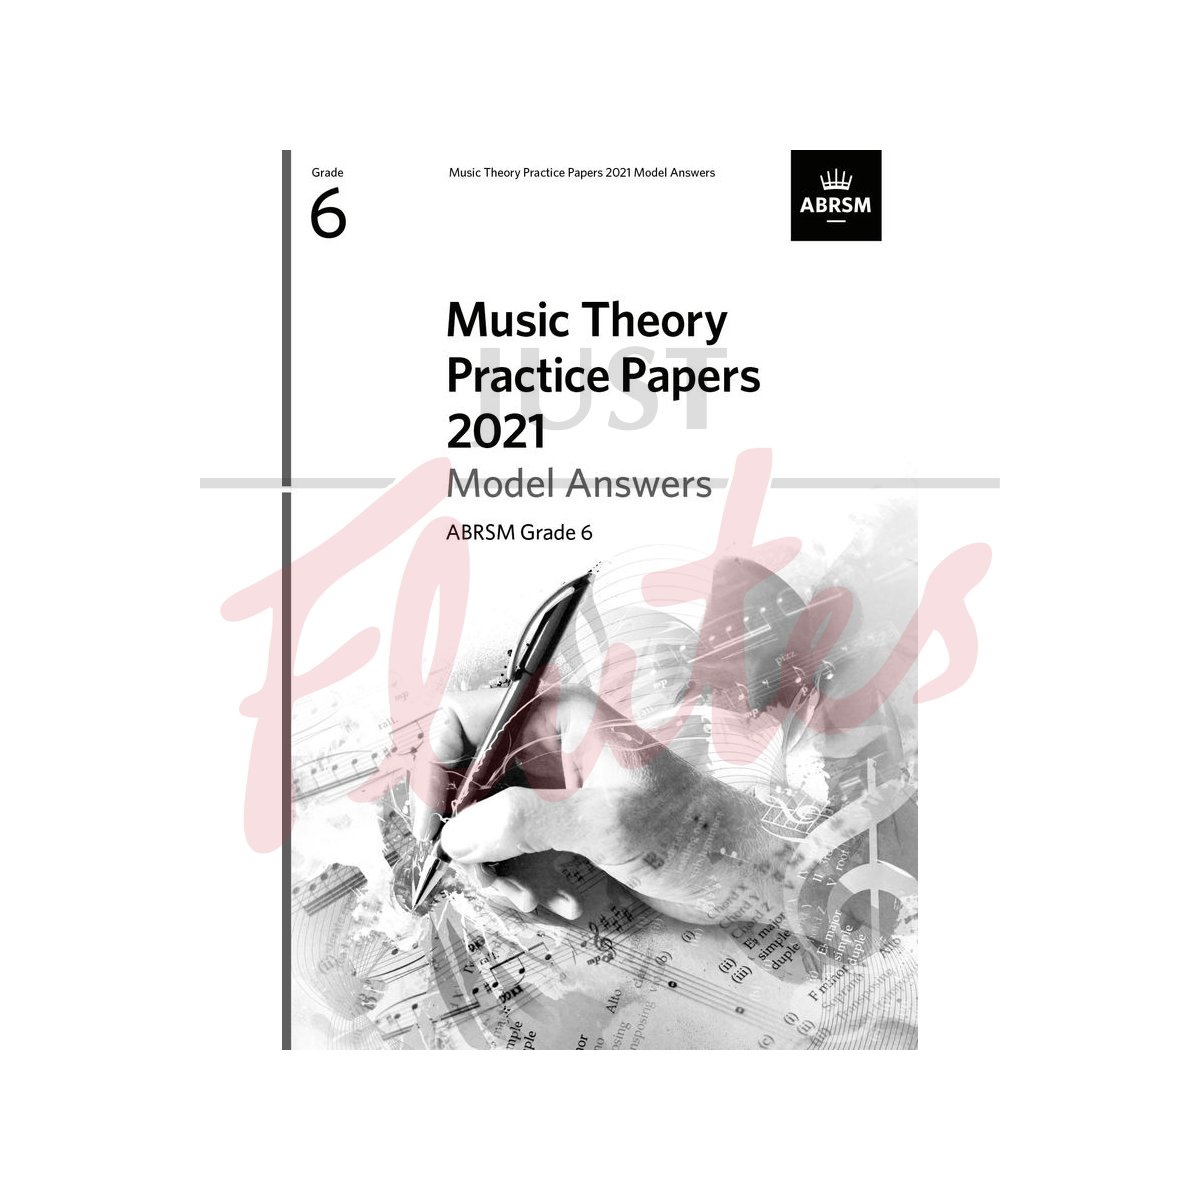 Music Theory Practice Papers 2021 Grade 6 - Model Answers